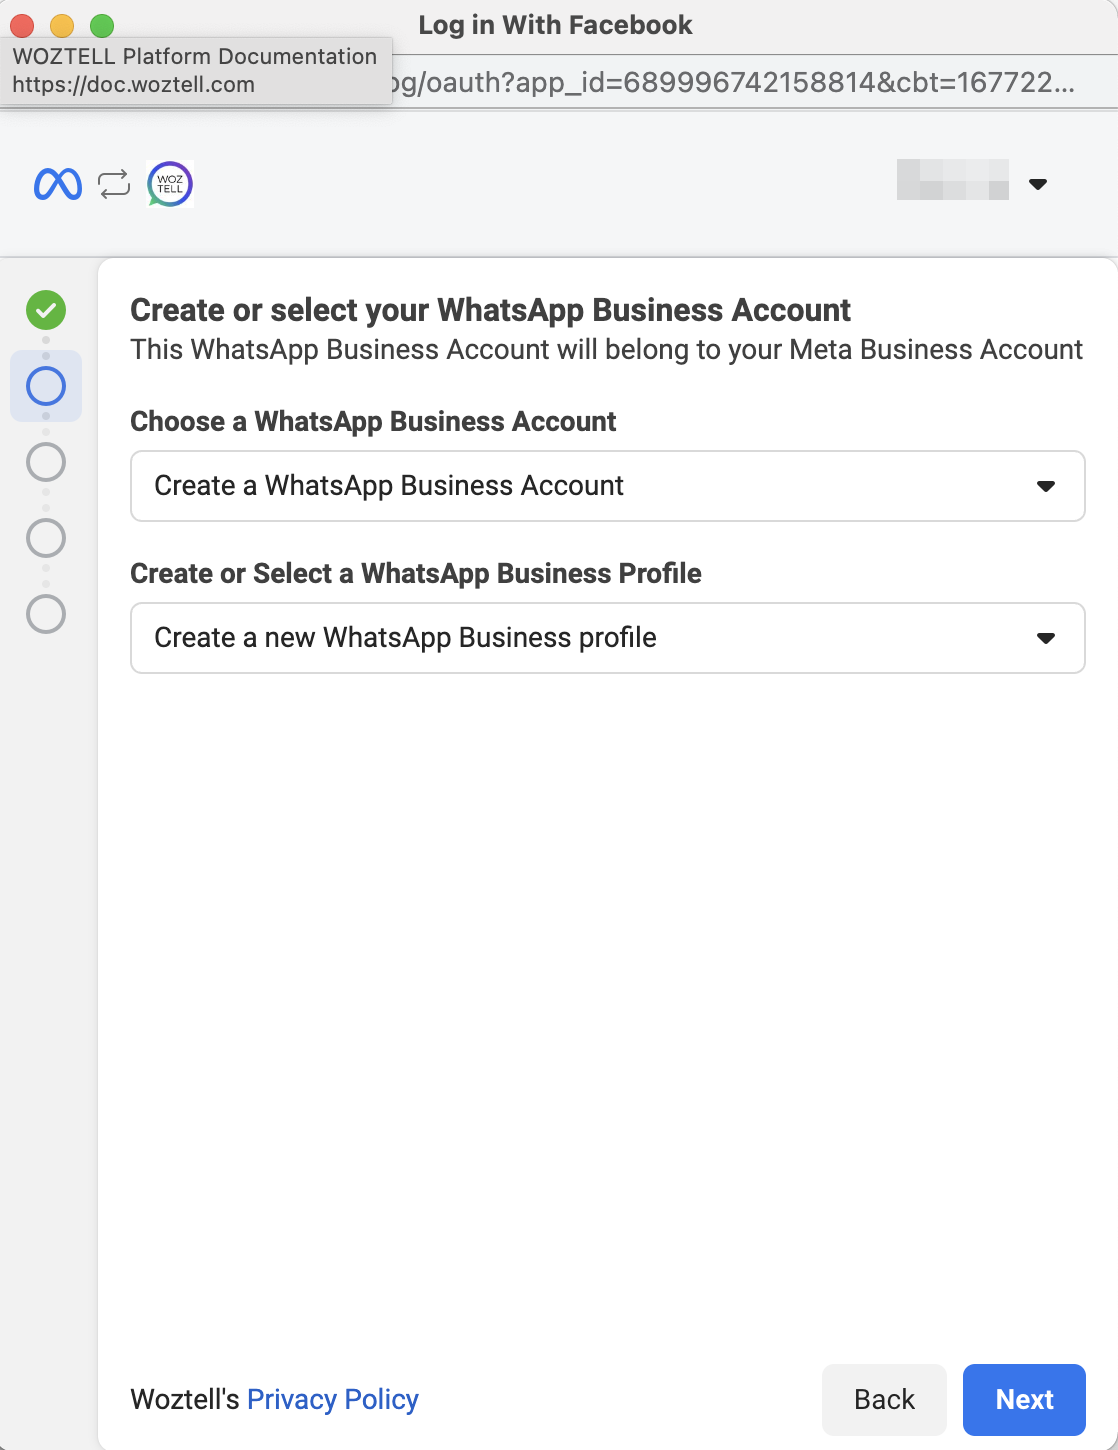 Create or Select a WhatsApp Business Accont